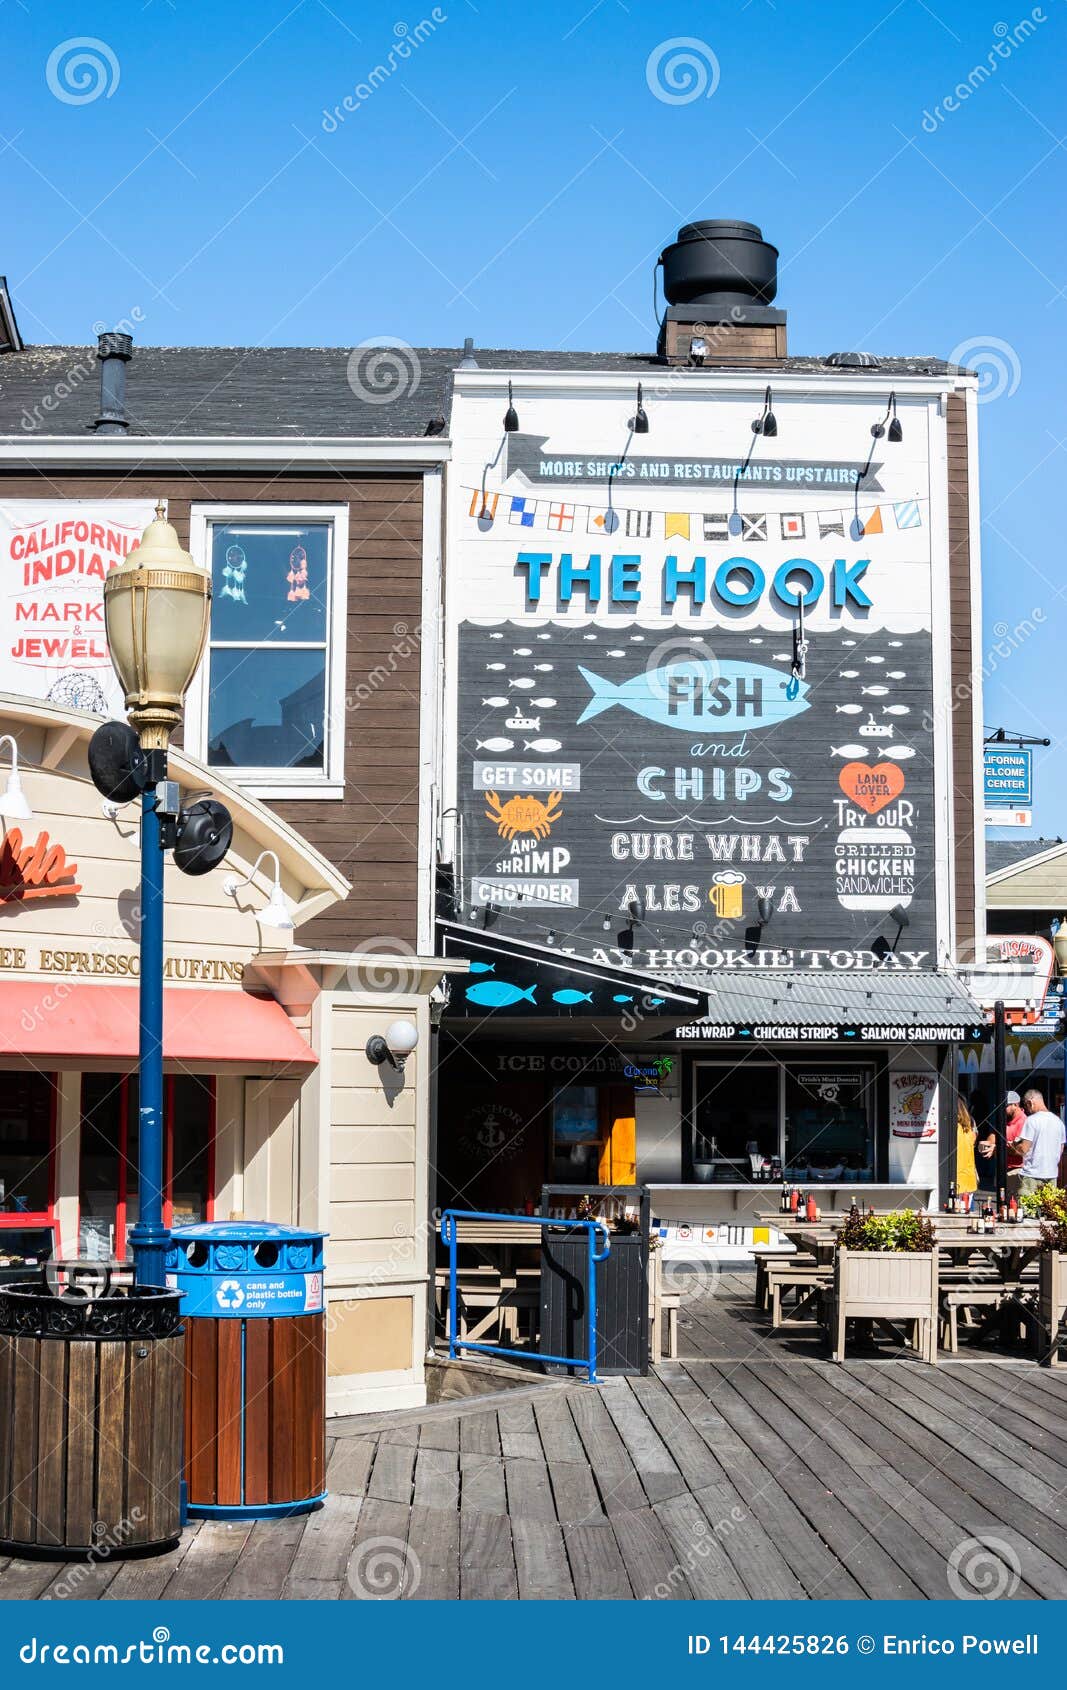 The Hook Fish and Chips Seafood Restaurant at Pier 39 Editorial